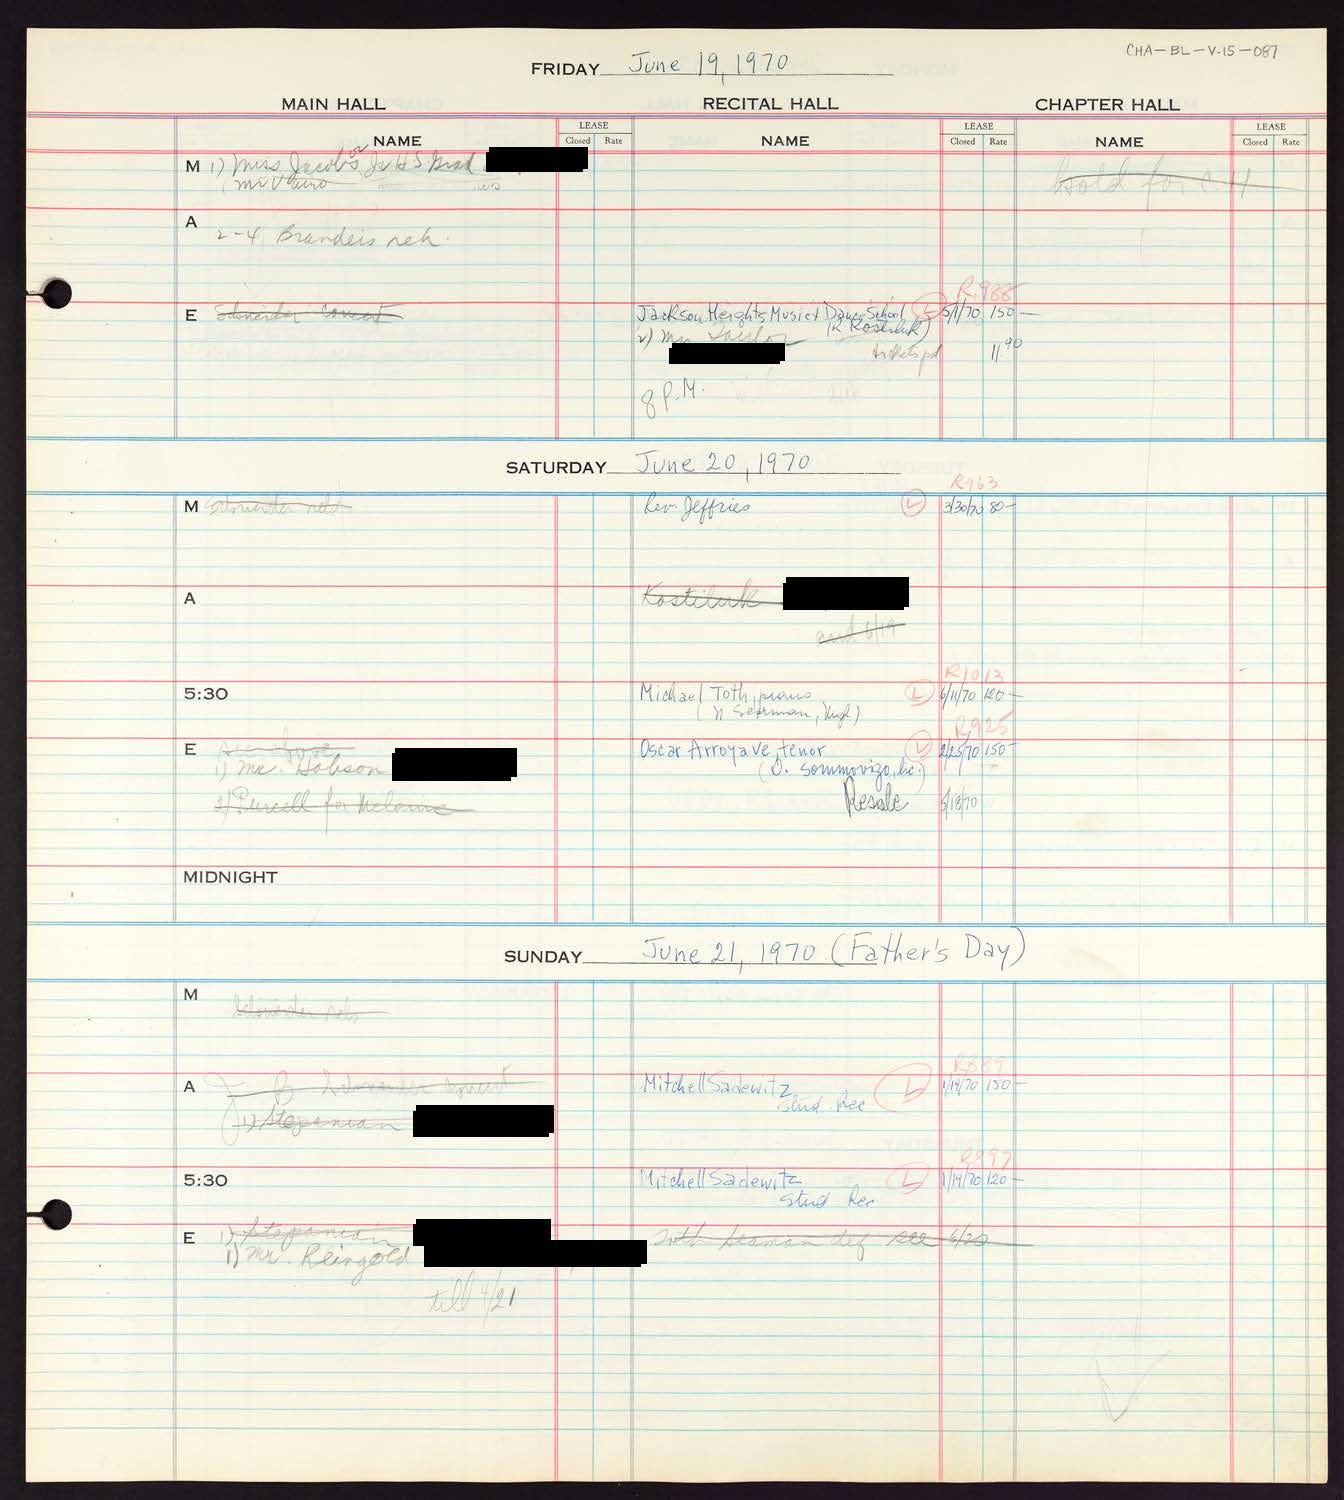 Carnegie Hall Booking Ledger, volume 15, page 87